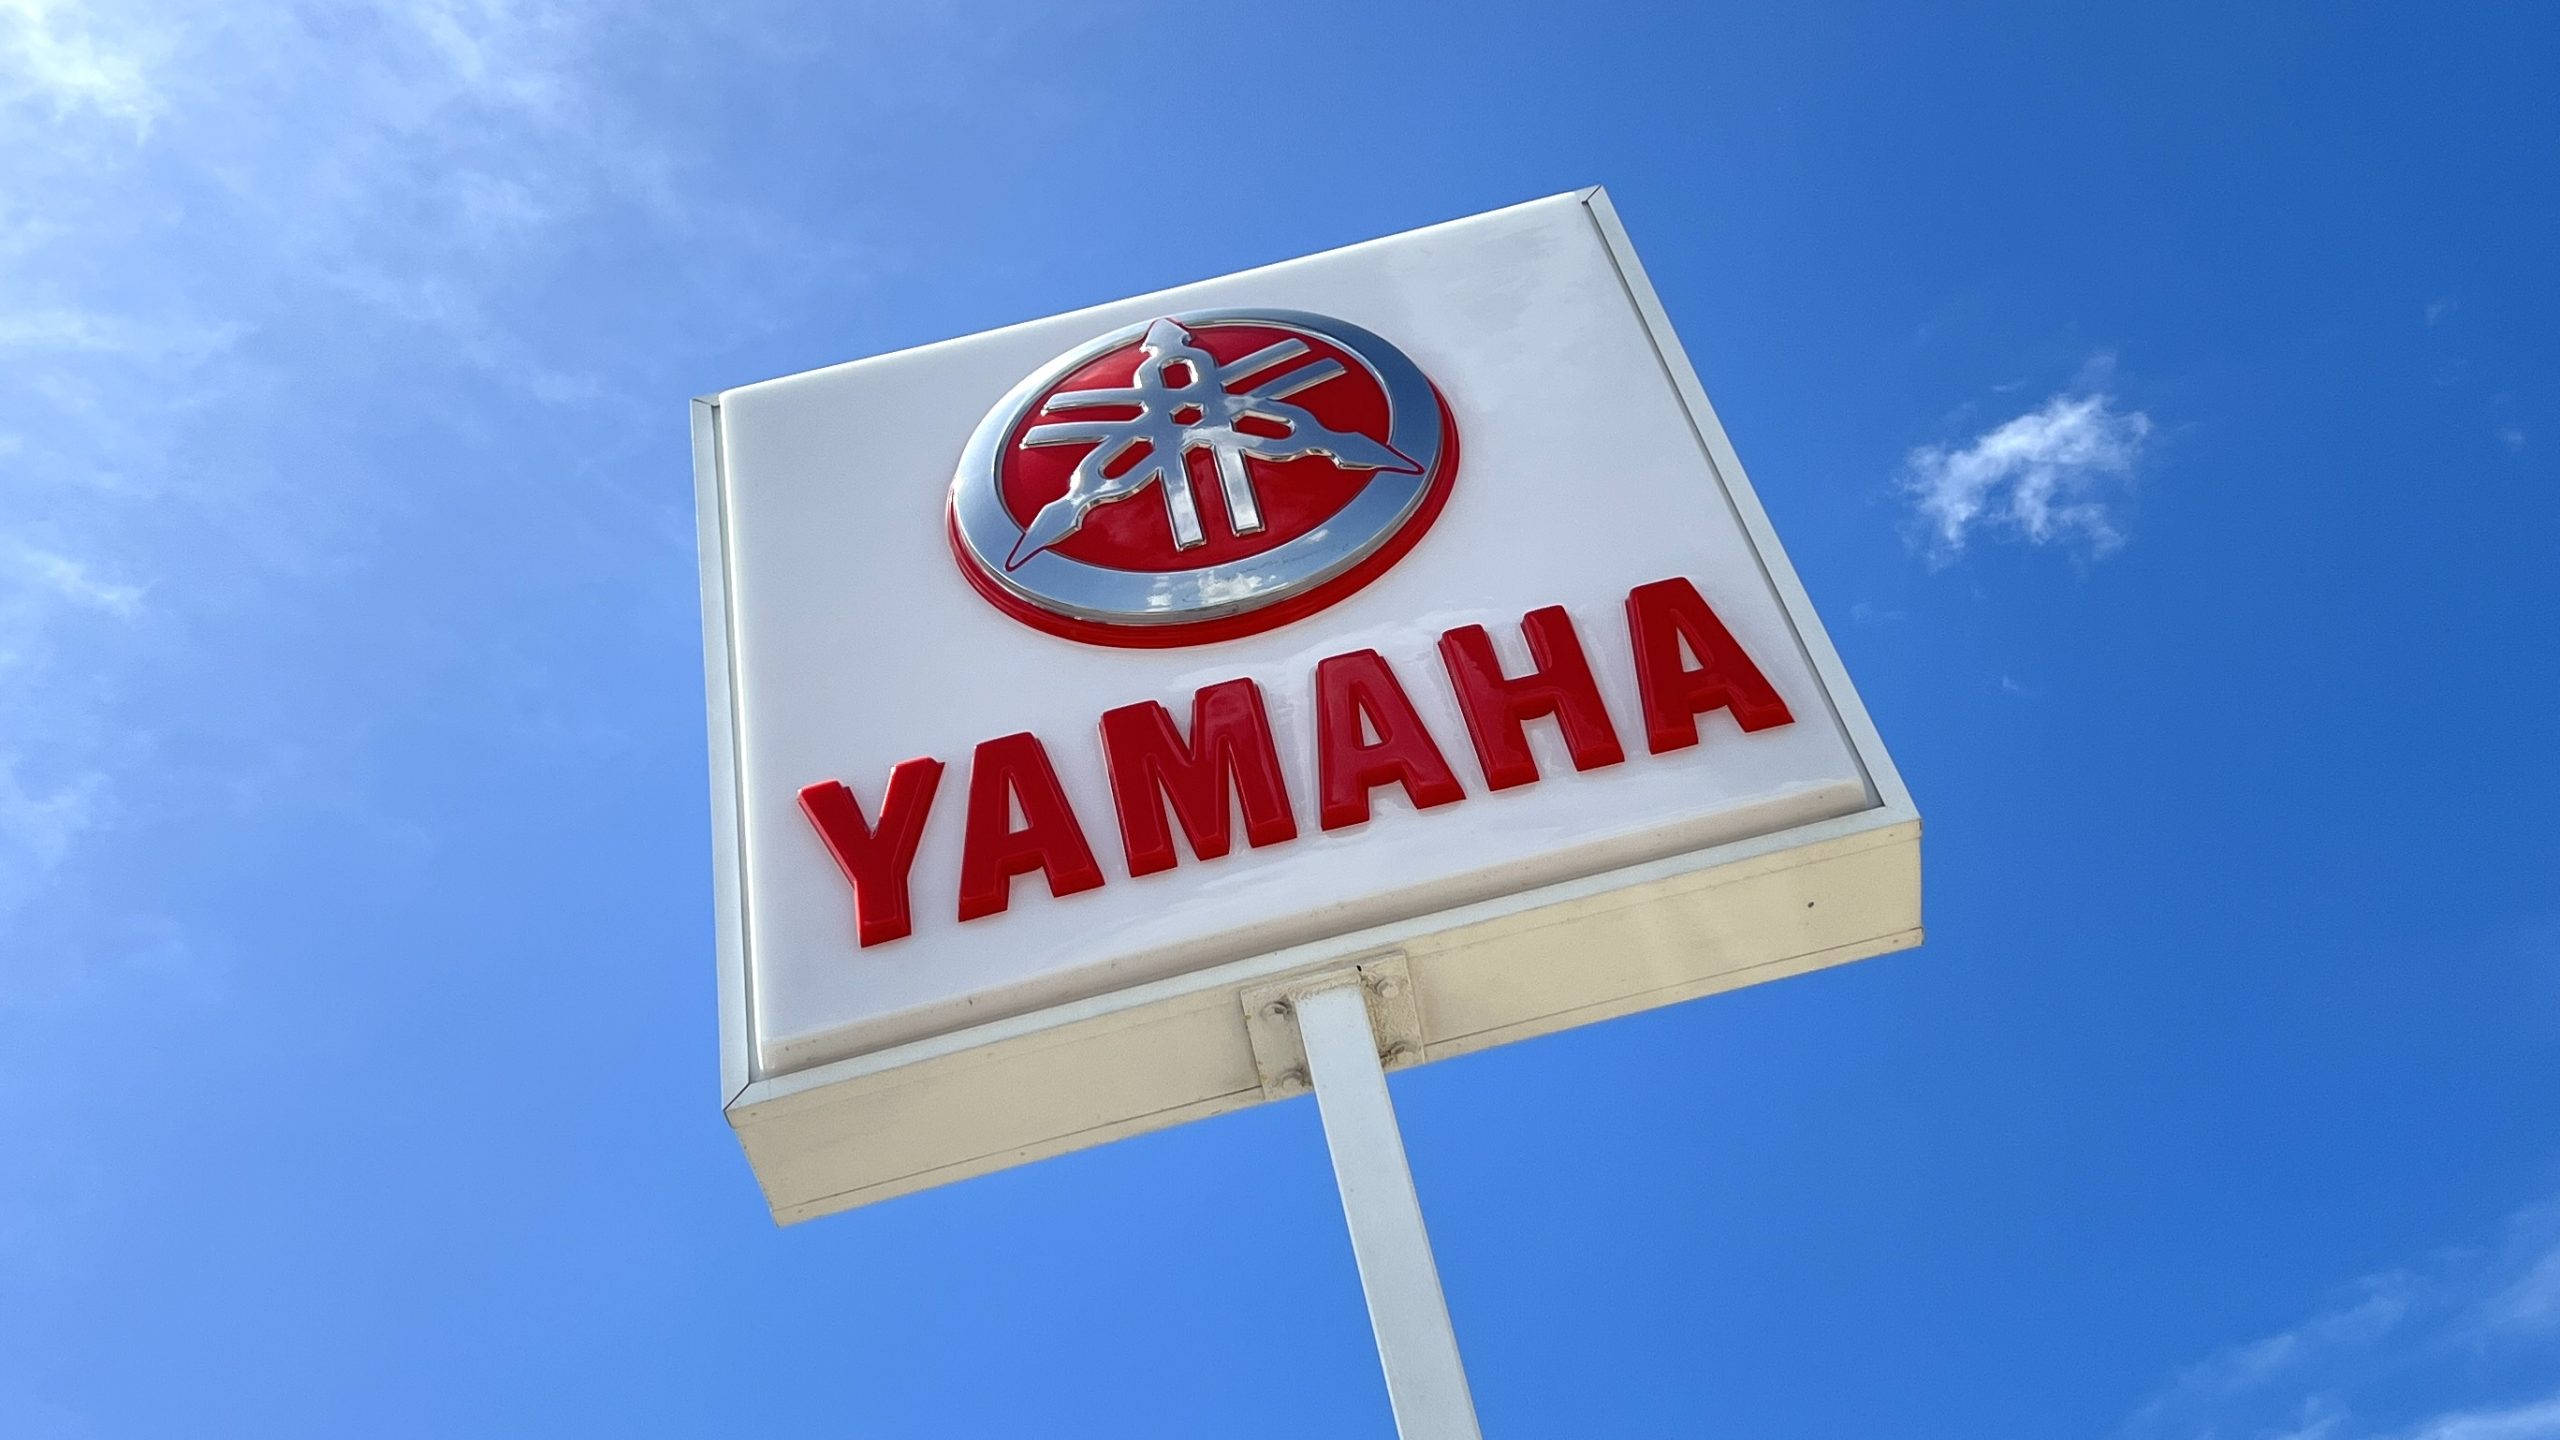 Fix finally here for faulty fuel buzzers and trip meters on Yamaha FX models